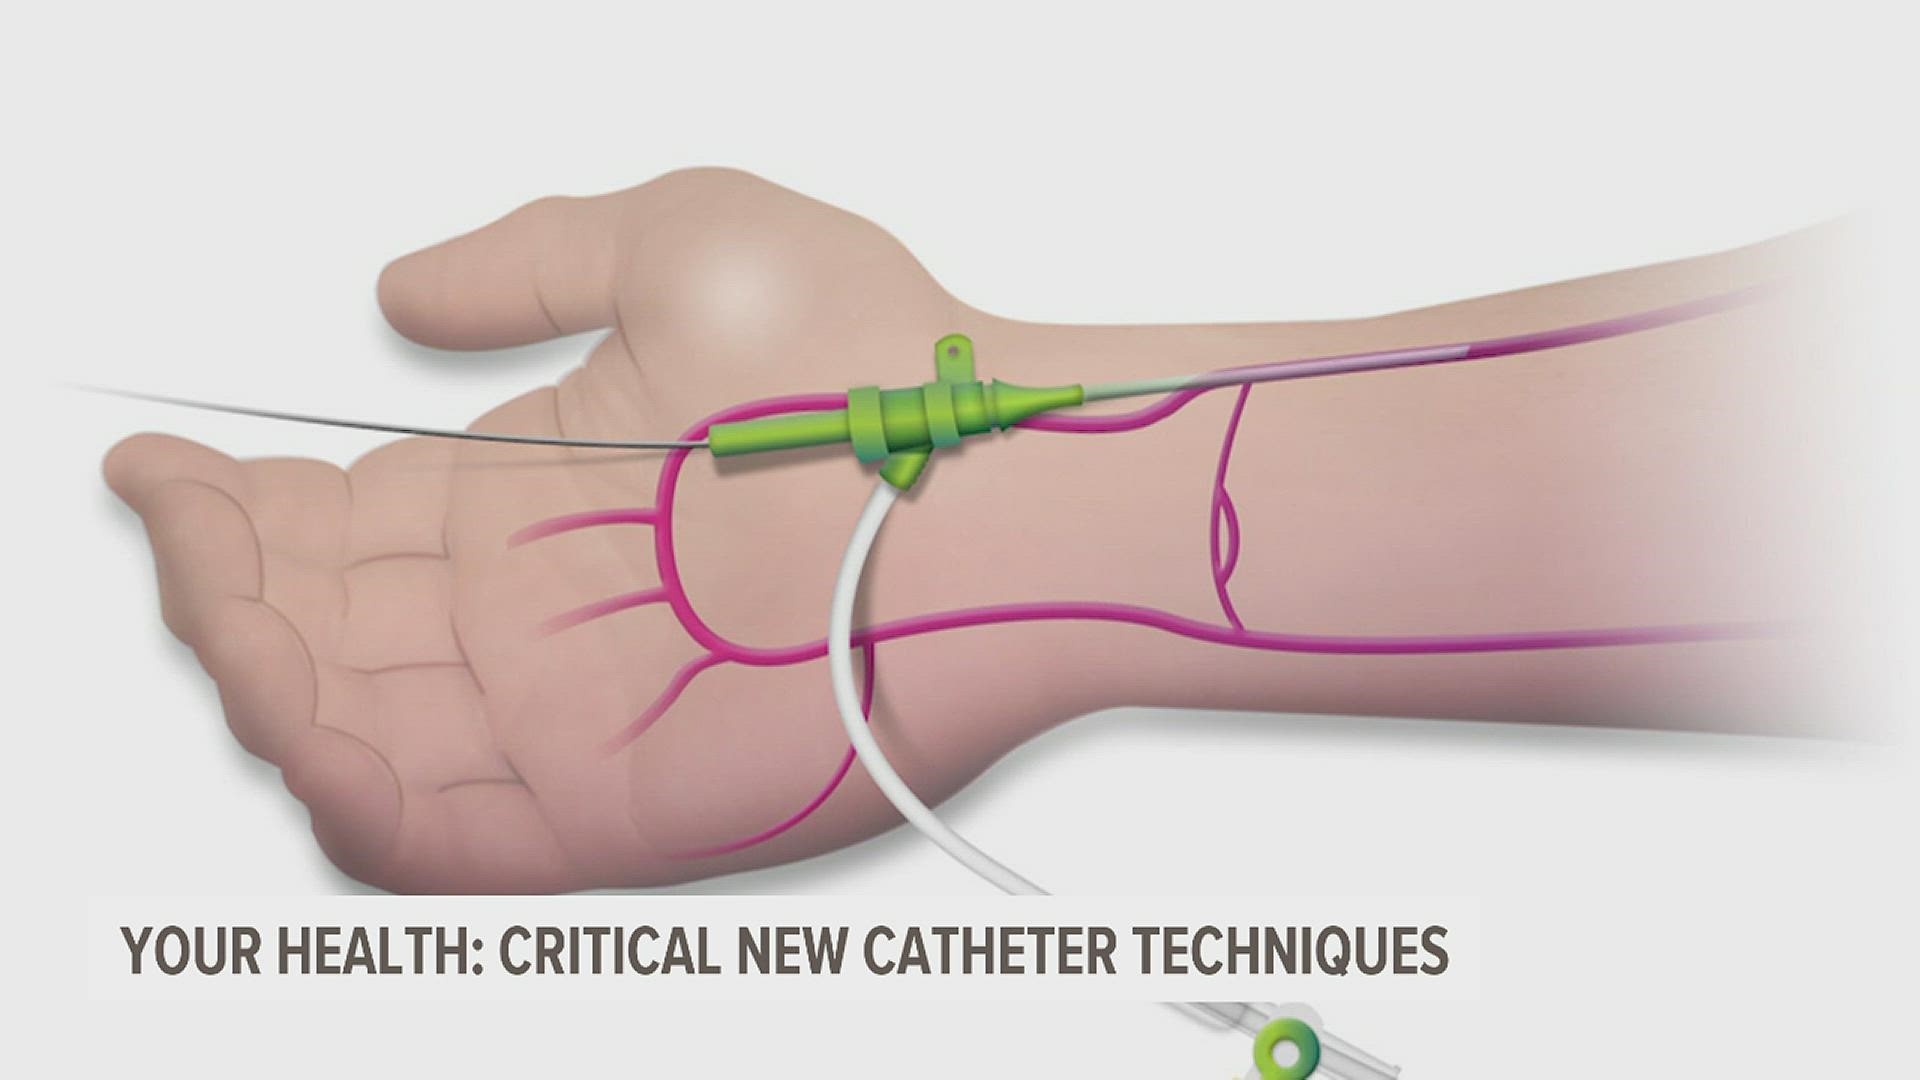 More than a million cardiac catheterization procedures are performed each year in the United States.